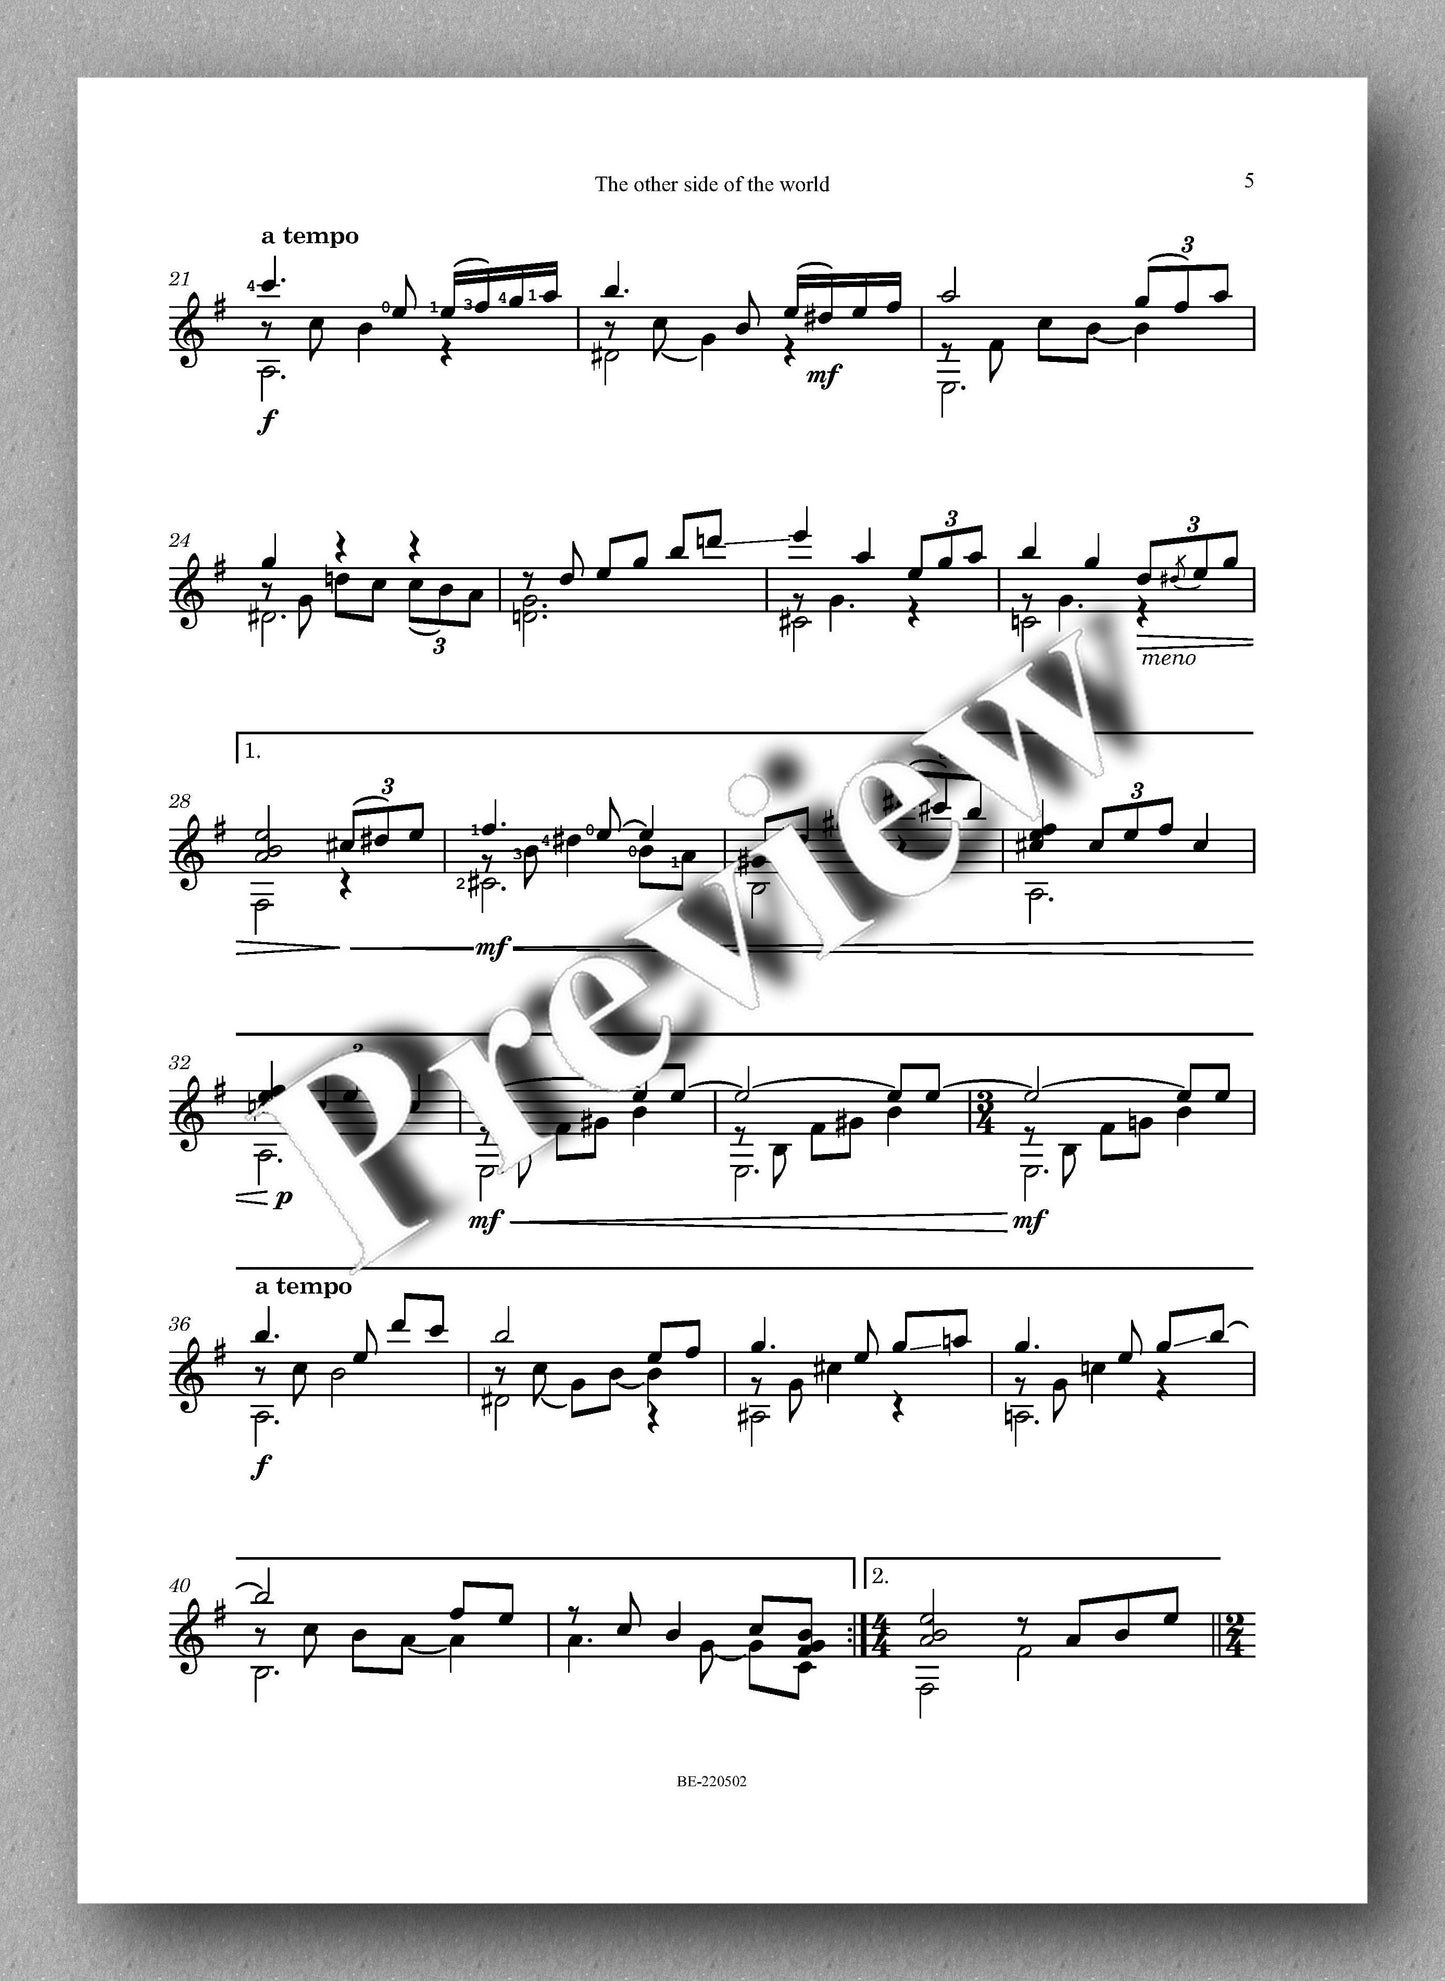 Erena, The Other Side of the World - music score 2